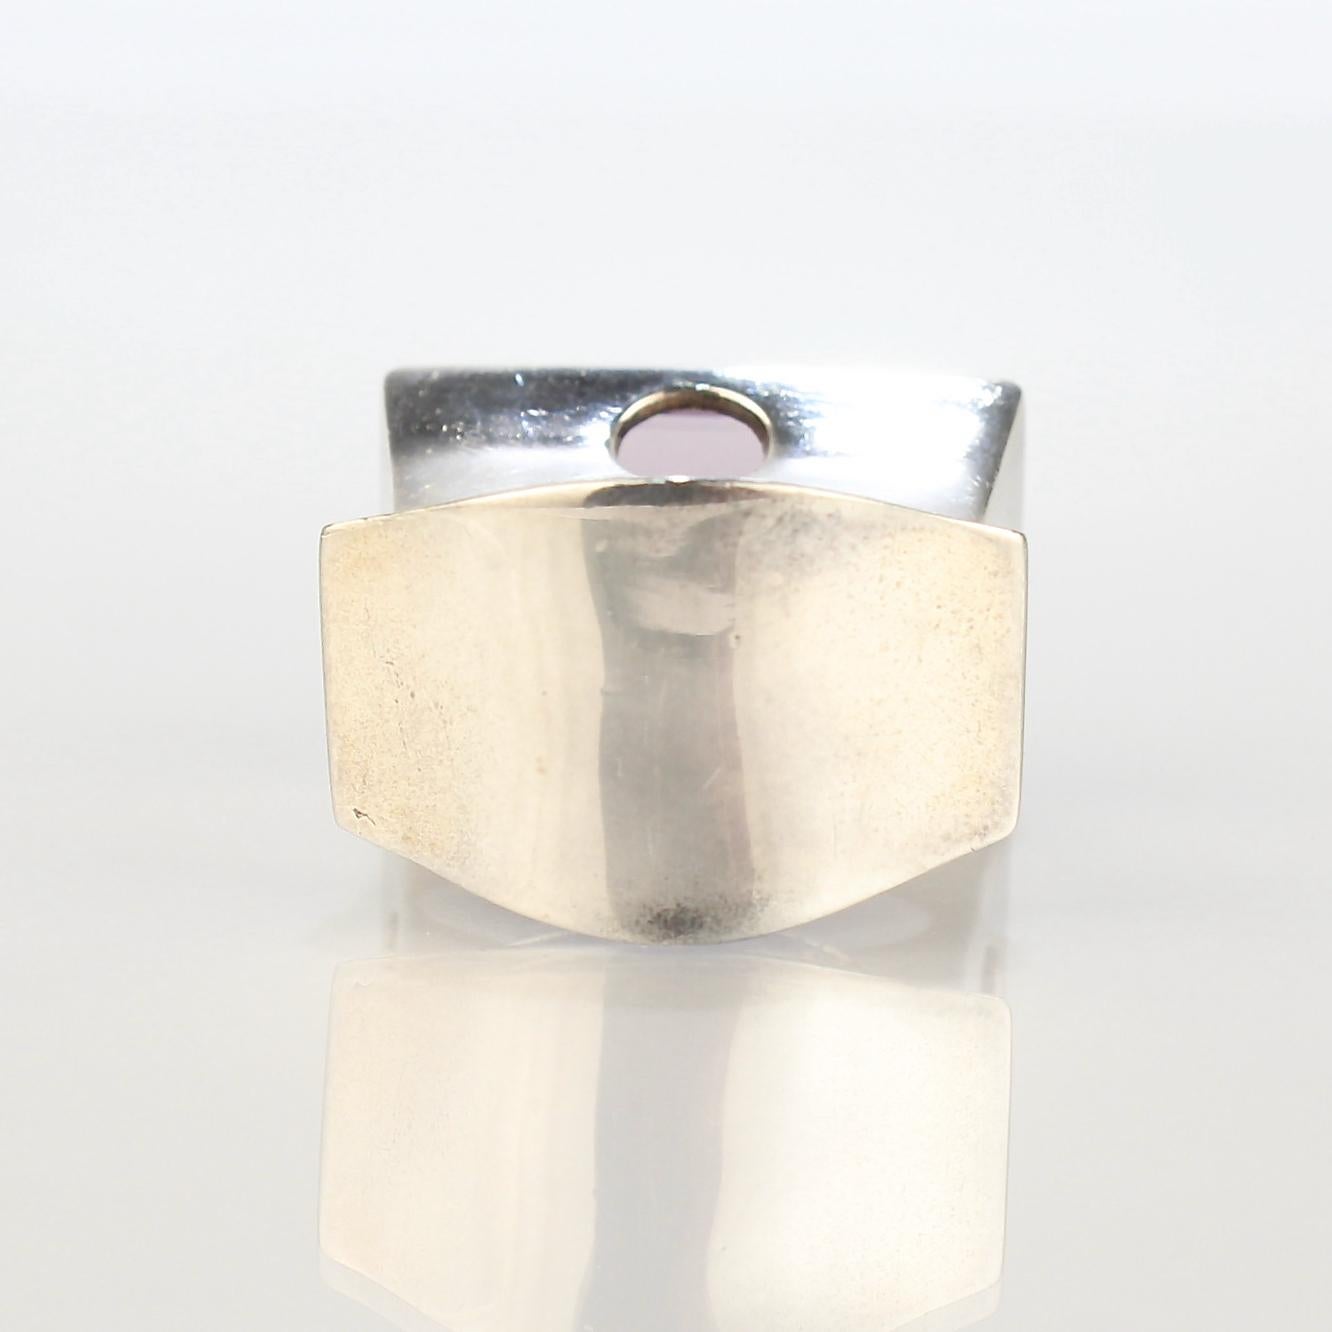 Modernist Signed Wesley Emmons Mid-Century Modern Sterling Silver and Amethyst Ring, 1970s For Sale